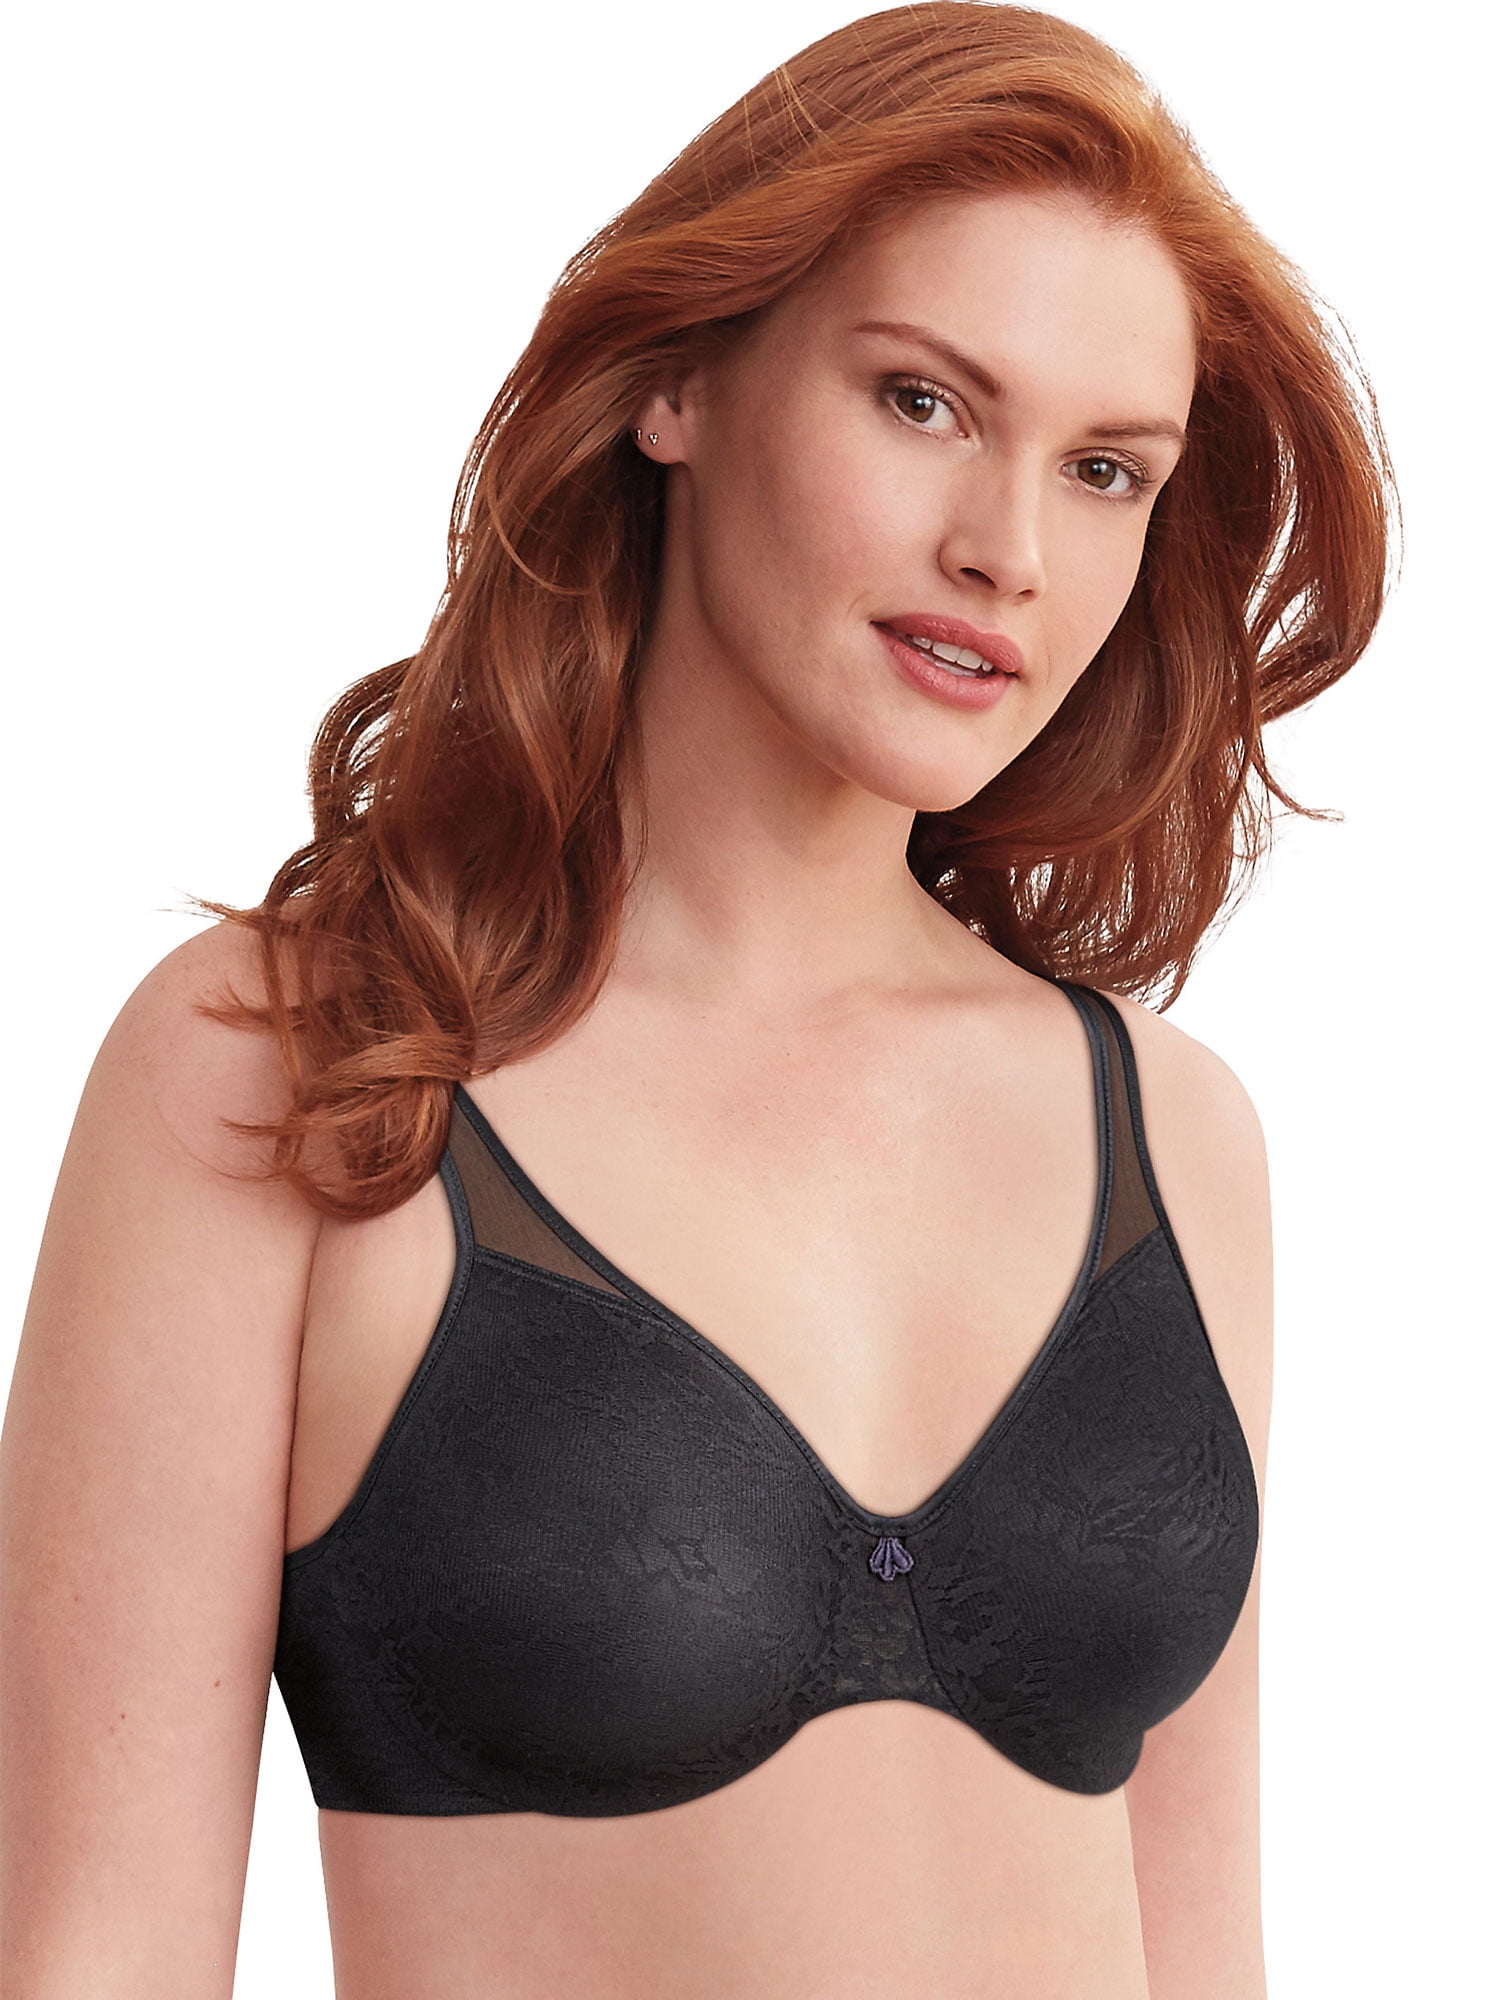 Bali Bras on Instagram: A must-have minimizer for sweater weather!